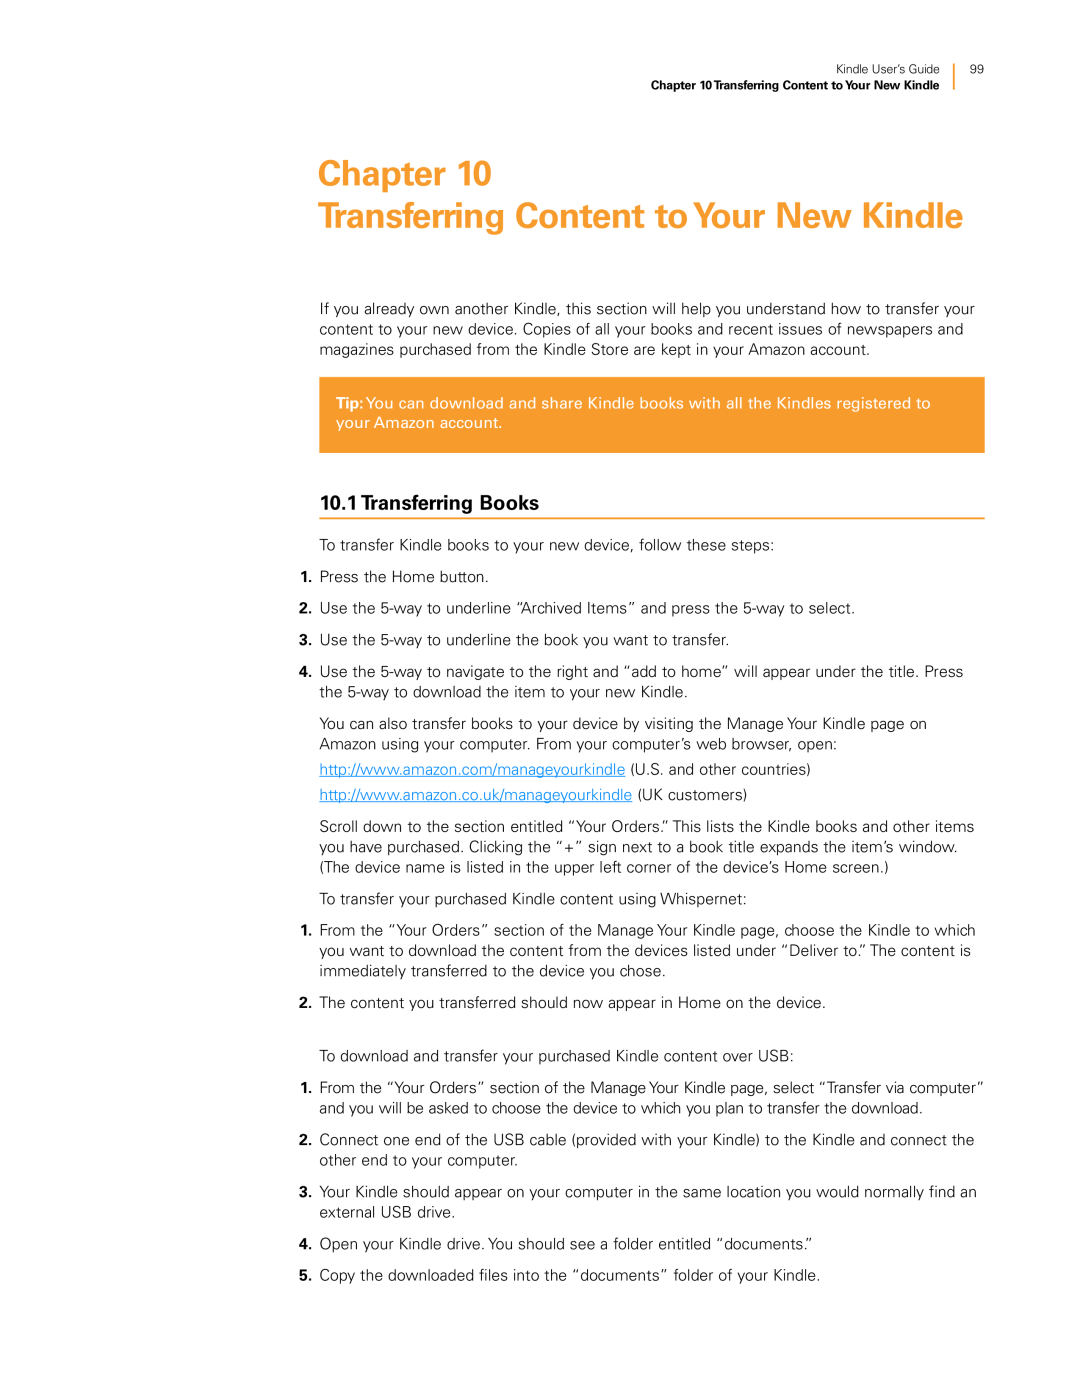 Amazon KNDKYBRD3G manual Chapter Transferring Content toYour New Kindle, Transferring Books 